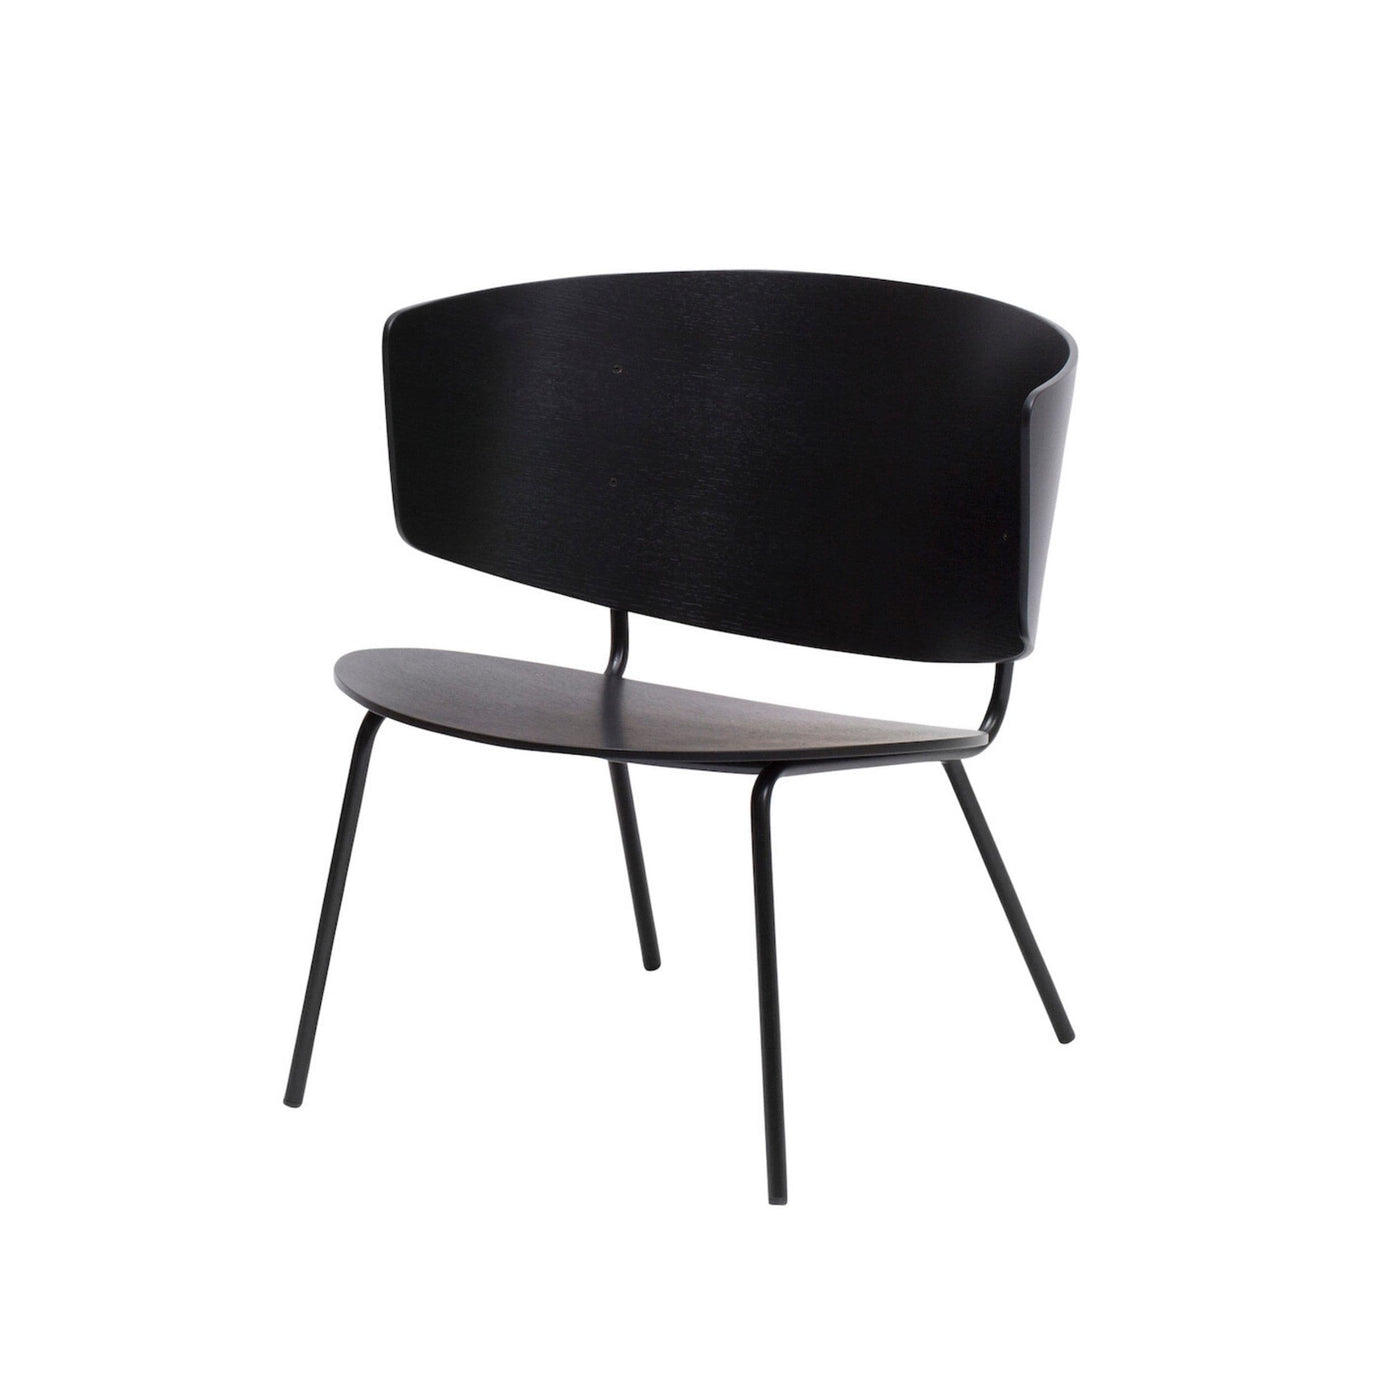 Ferm Living herman lounge chair black. Available from someday designs